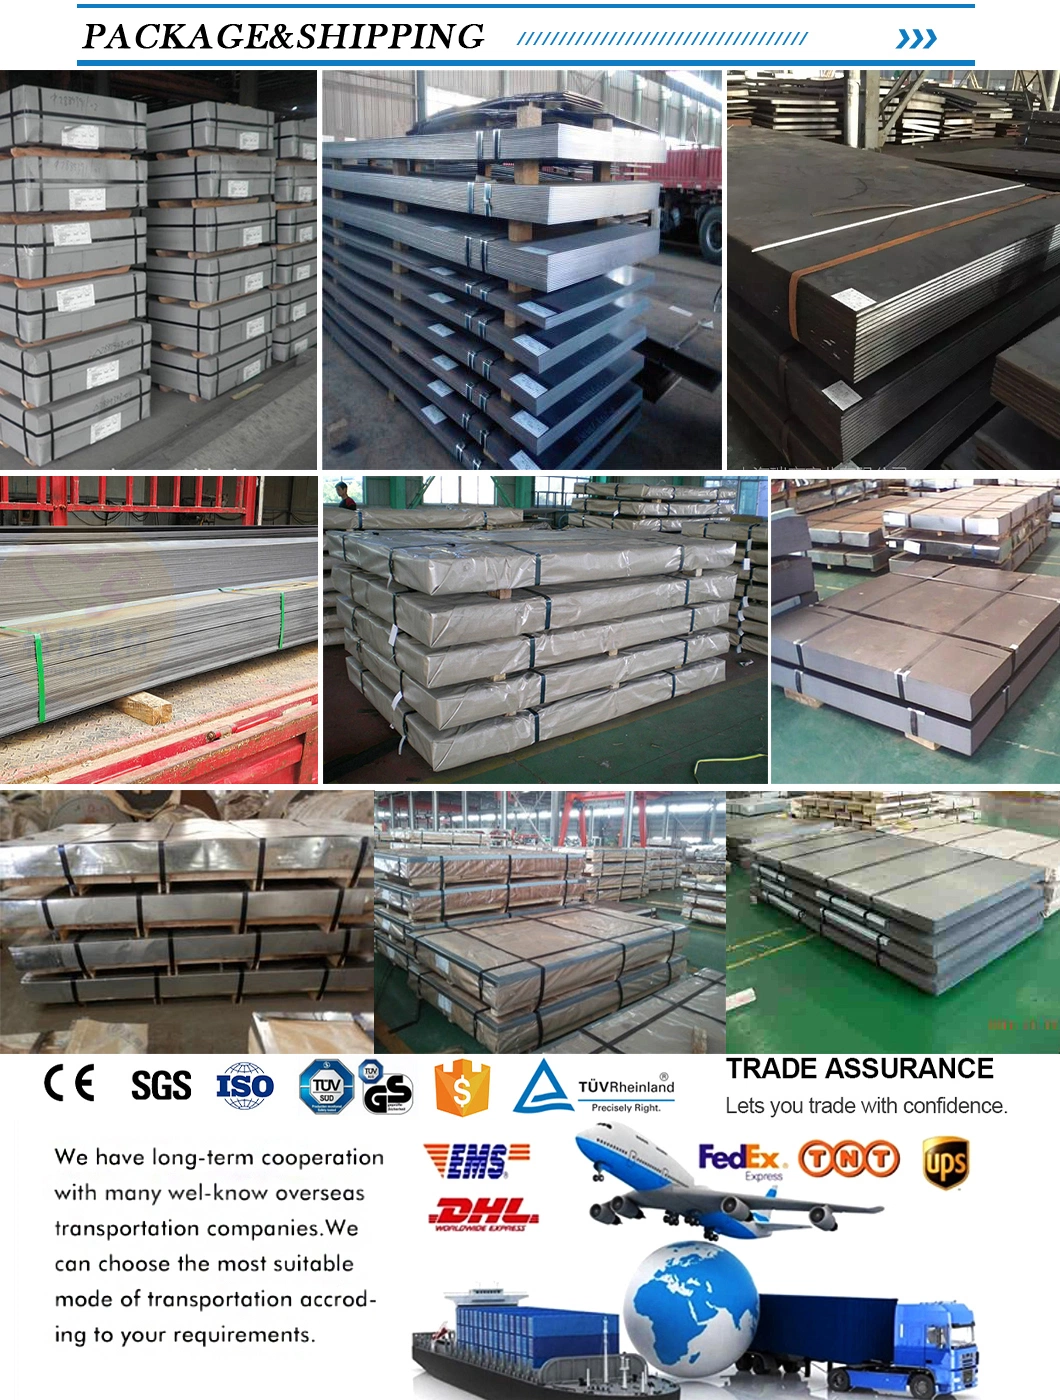 China Manufacture Lowest Price Ss355jr S275jr HRC Ms Hot Rolled Carbon Black Iron Metal Boilers Bridges Ship Plate Trip Steel Sheet Plate for Building Material